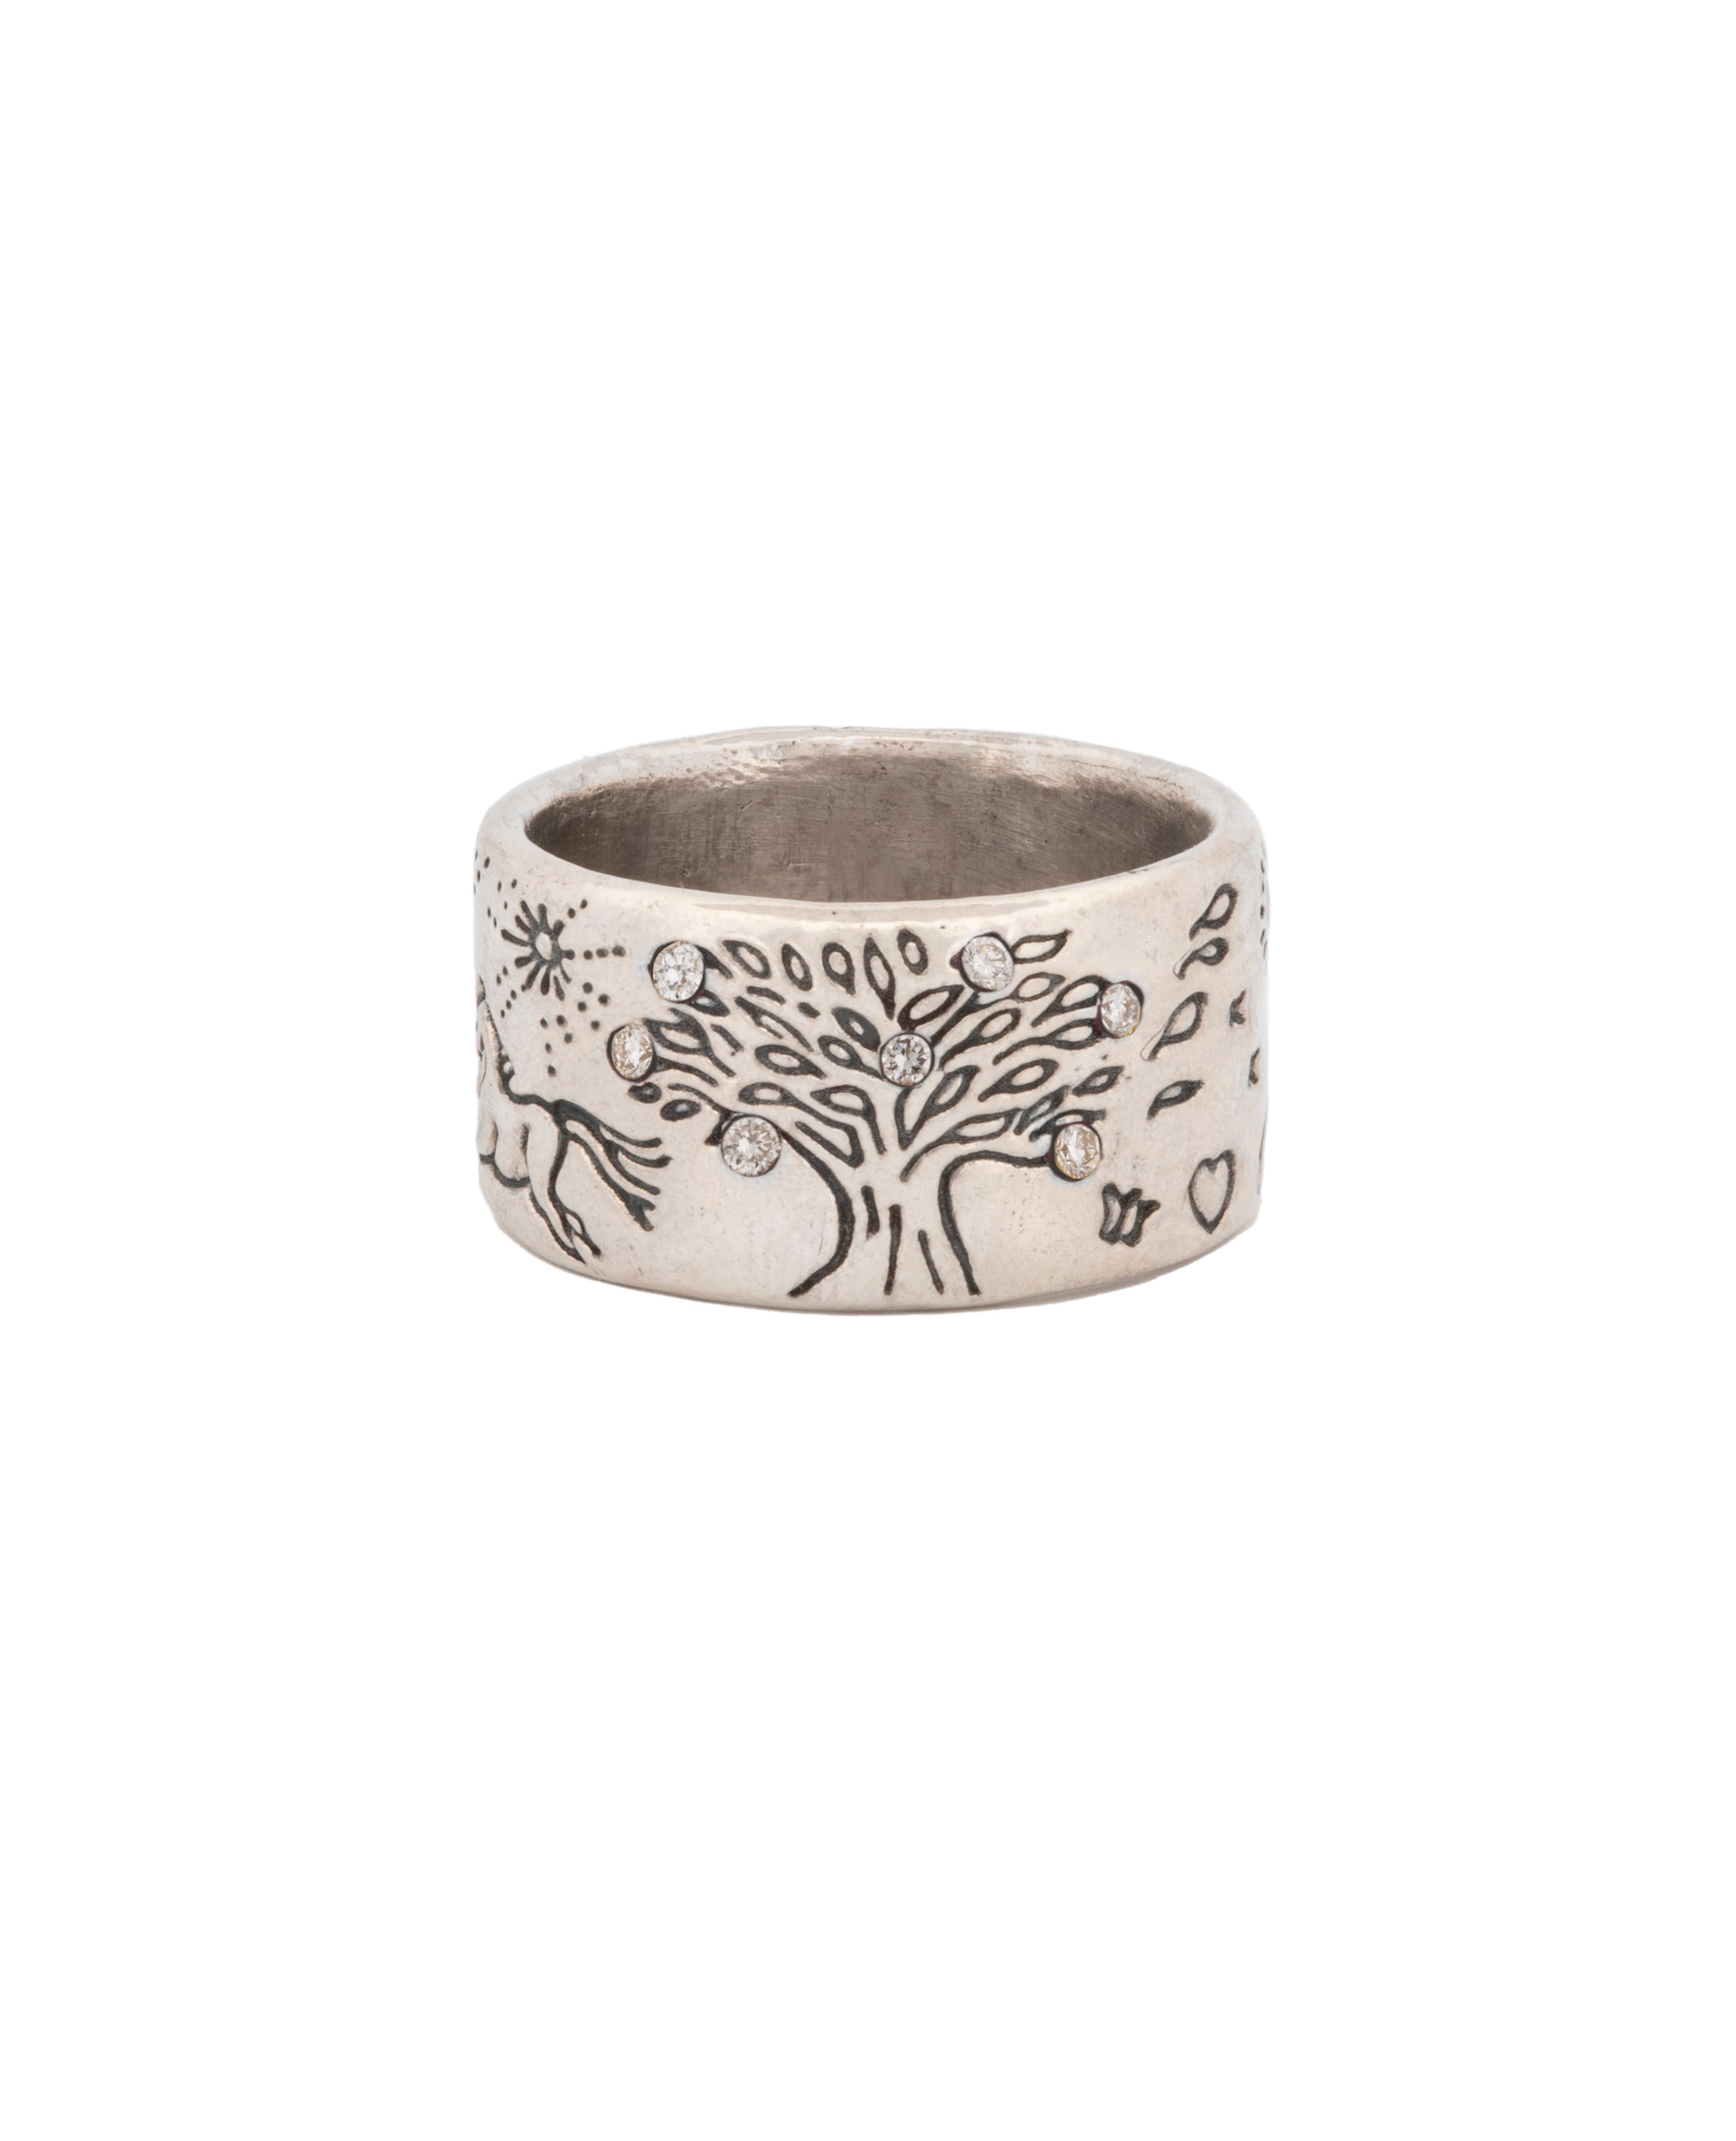 The Mighty Oak Ring